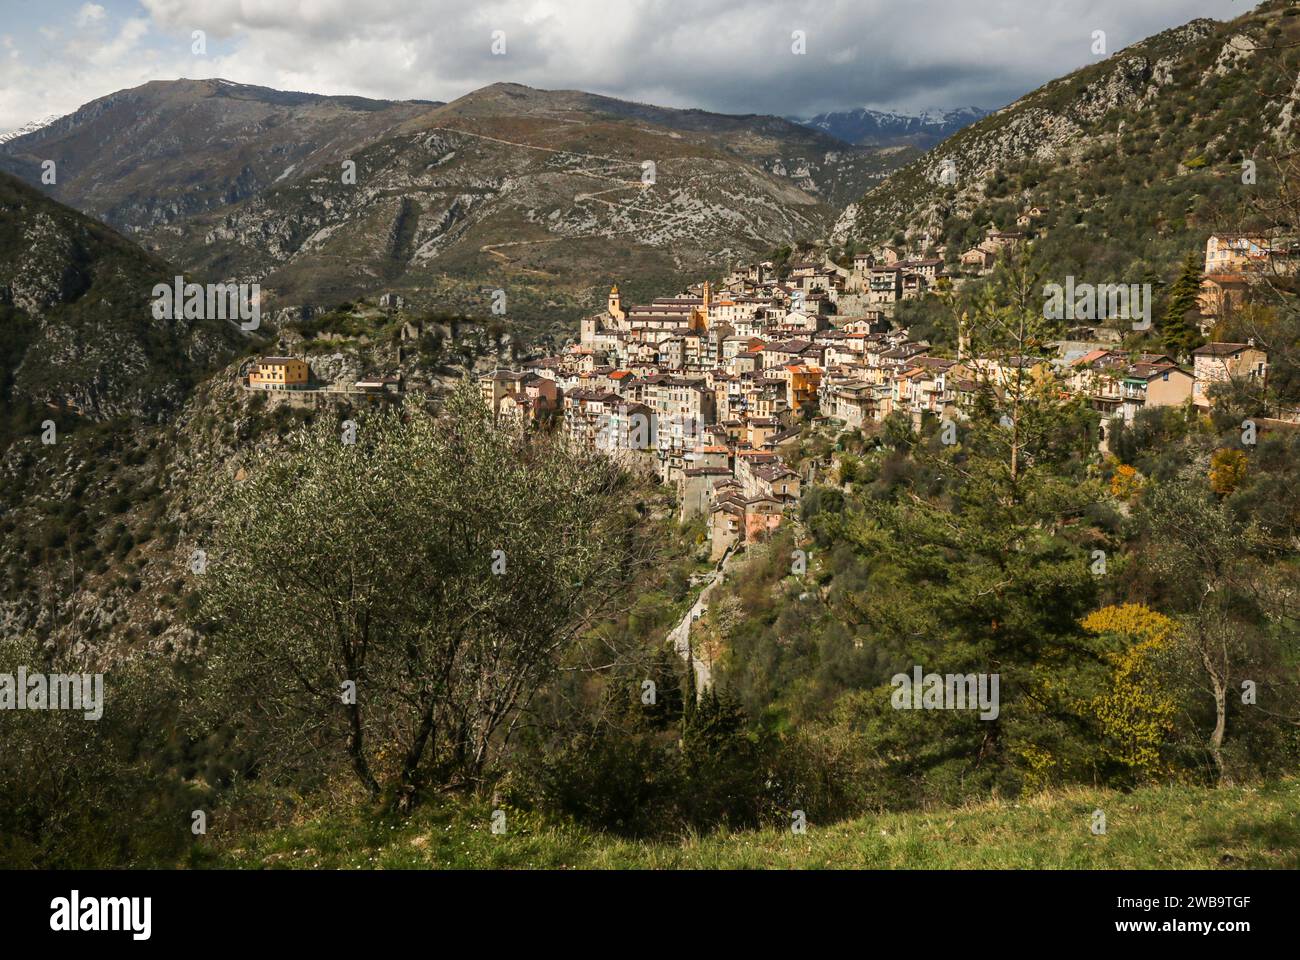 Saorge, a medieval village in the valley of La Roya in Alpes-Maritimes department, PACA region, southeastern France Stock Photo